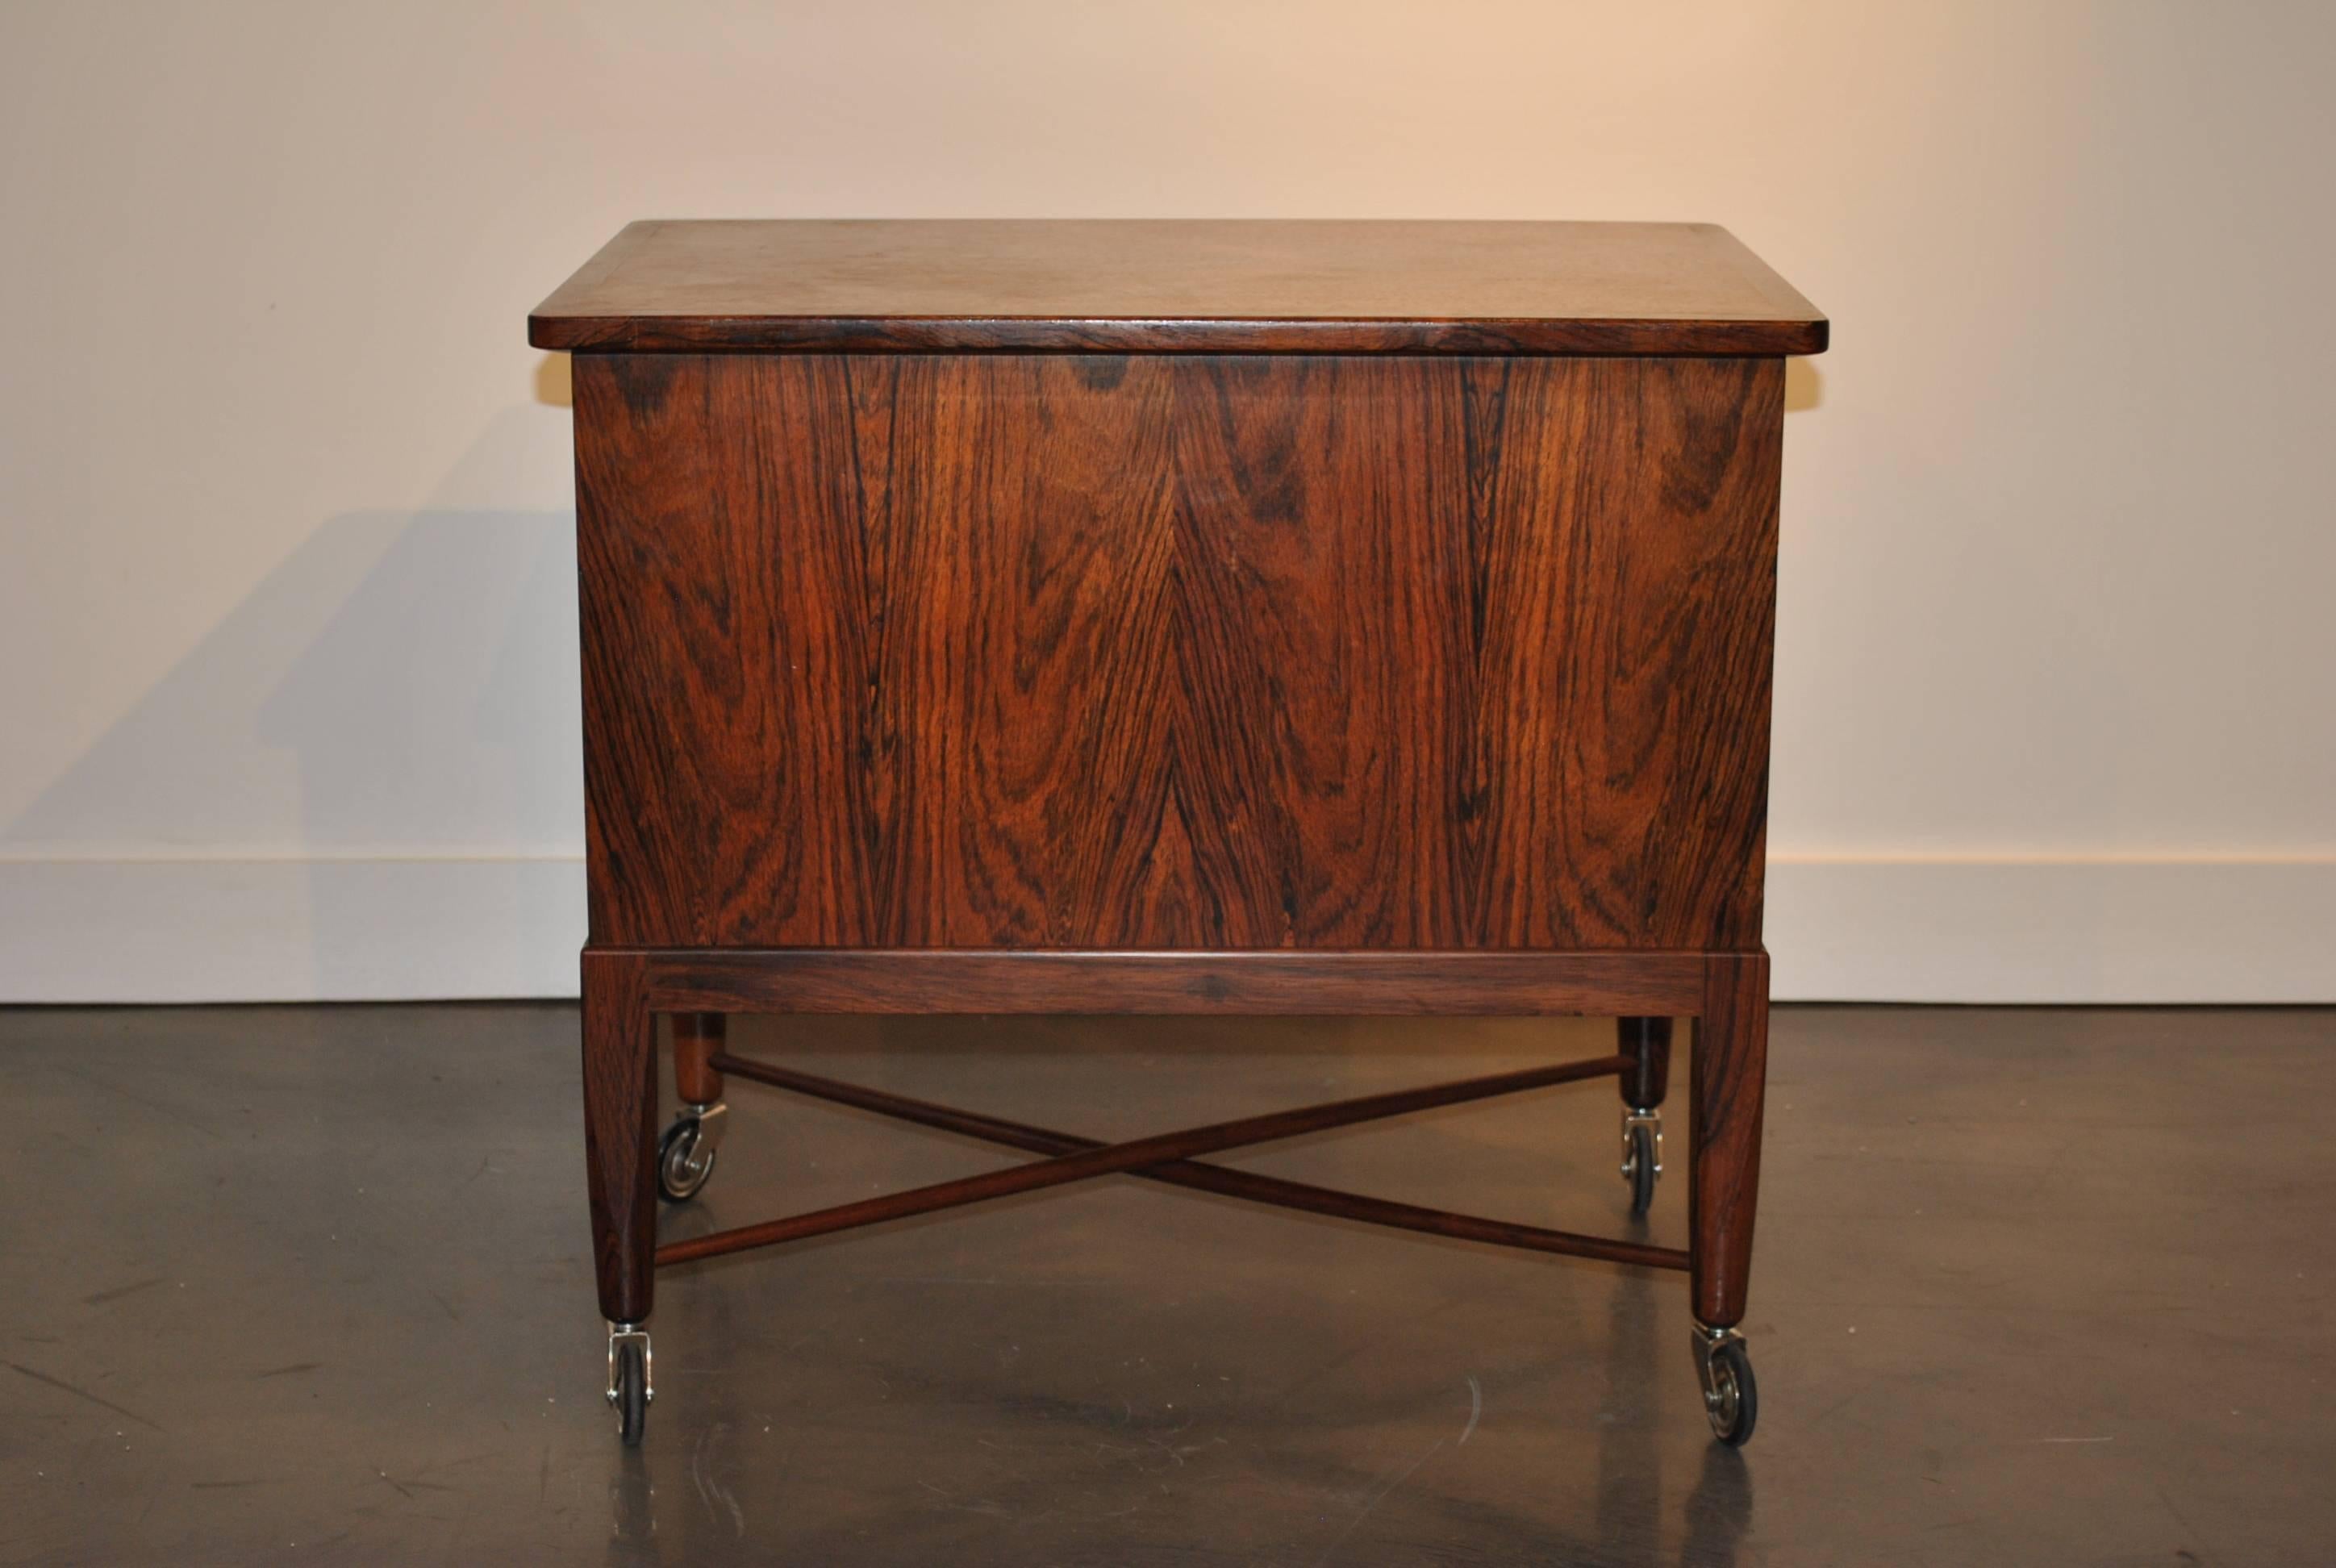 Lovely handcrafted Swedish chest on wheels. Vivid Santos with wonderful grain features. The interior holds two sliding tray inserts with many compartments and storage beneath. Great condition throughout.
Insured shipping.
 